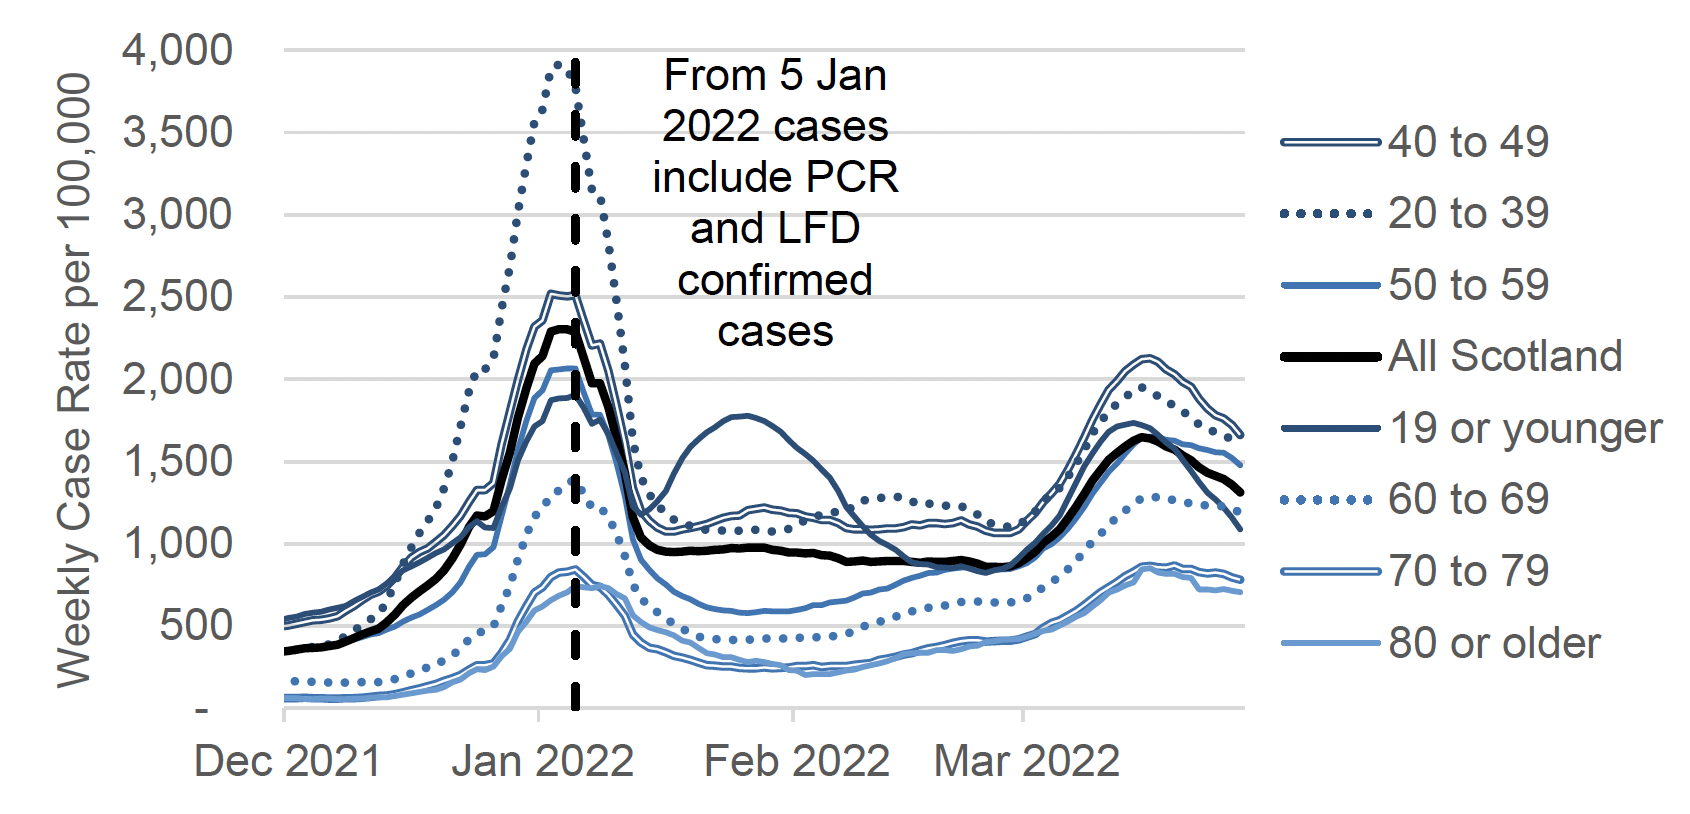 a line graph showing the weekly total combined PCR and LFD case rate (including reinfections) by specimen date per 100,000 people by age group, from December 2021 up to March 2022. All age groups saw a peak in weekly case rates in early January 2022, and from early March there is an increase visible in all age groups, followed by decreasing case rates in age groups younger than 50 in the week ending 20 March and later decreasing case rates in all age groups in the week ending 27 March 2022. The chart has a note that says: “from 5 January 2022 cases include PCR and LFD confirmed cases”. Before 5 January 2022, the case rate includes only PCR confirmed cases.